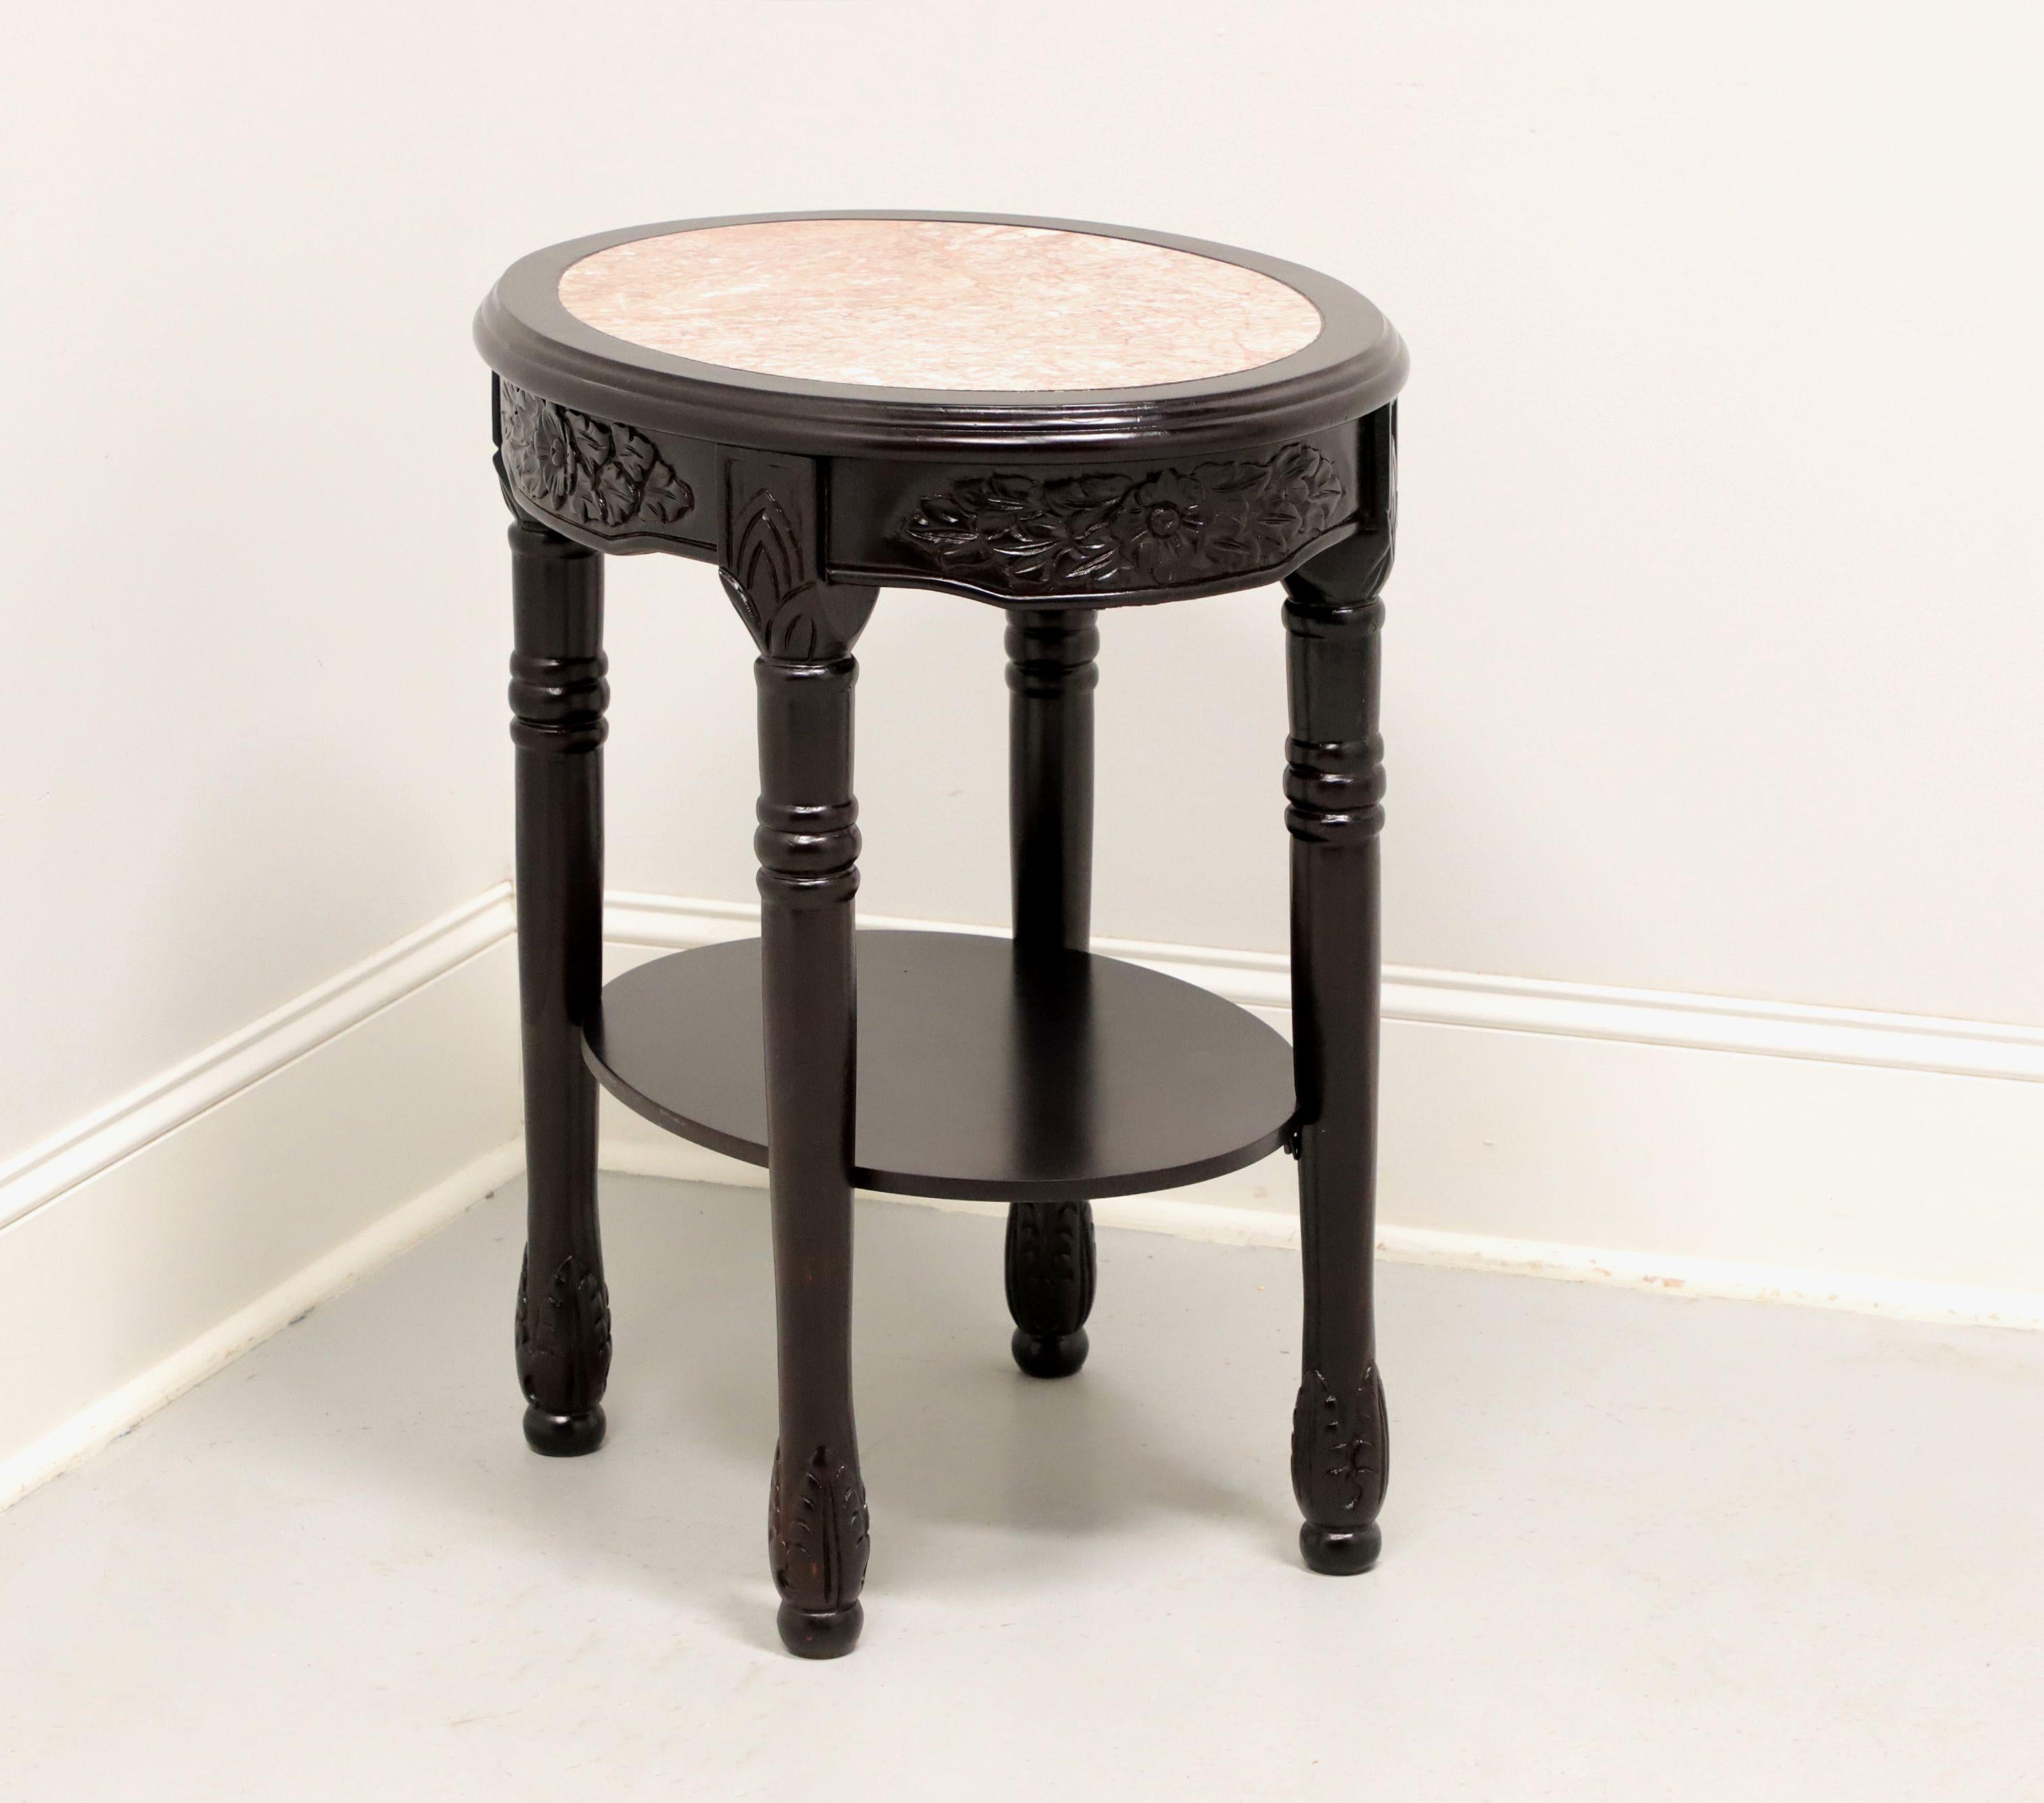 Antique Rosewood Finish Victorian Oval Marble Top Occasional Table - A For Sale 4